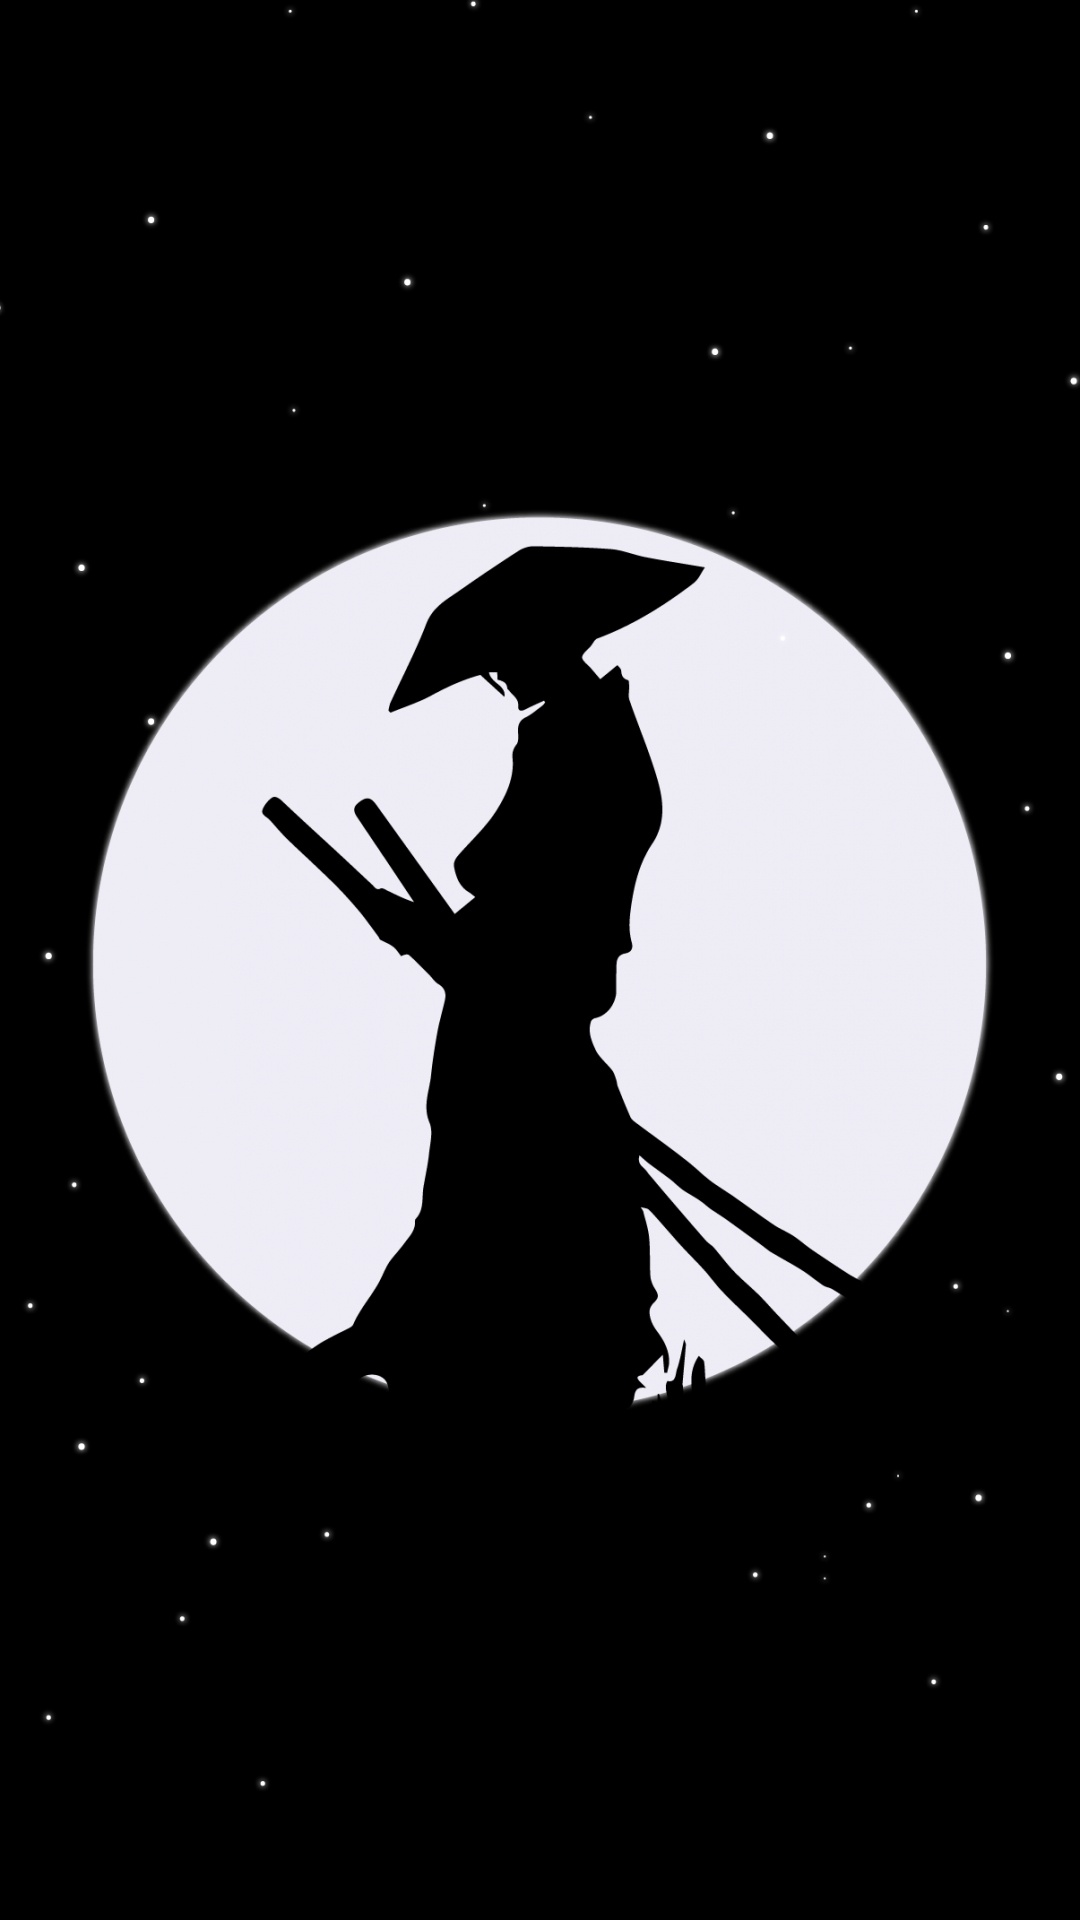 Samurai, Moon, Amoled, Space, Astronomical Object. Wallpaper in 1080x1920 Resolution